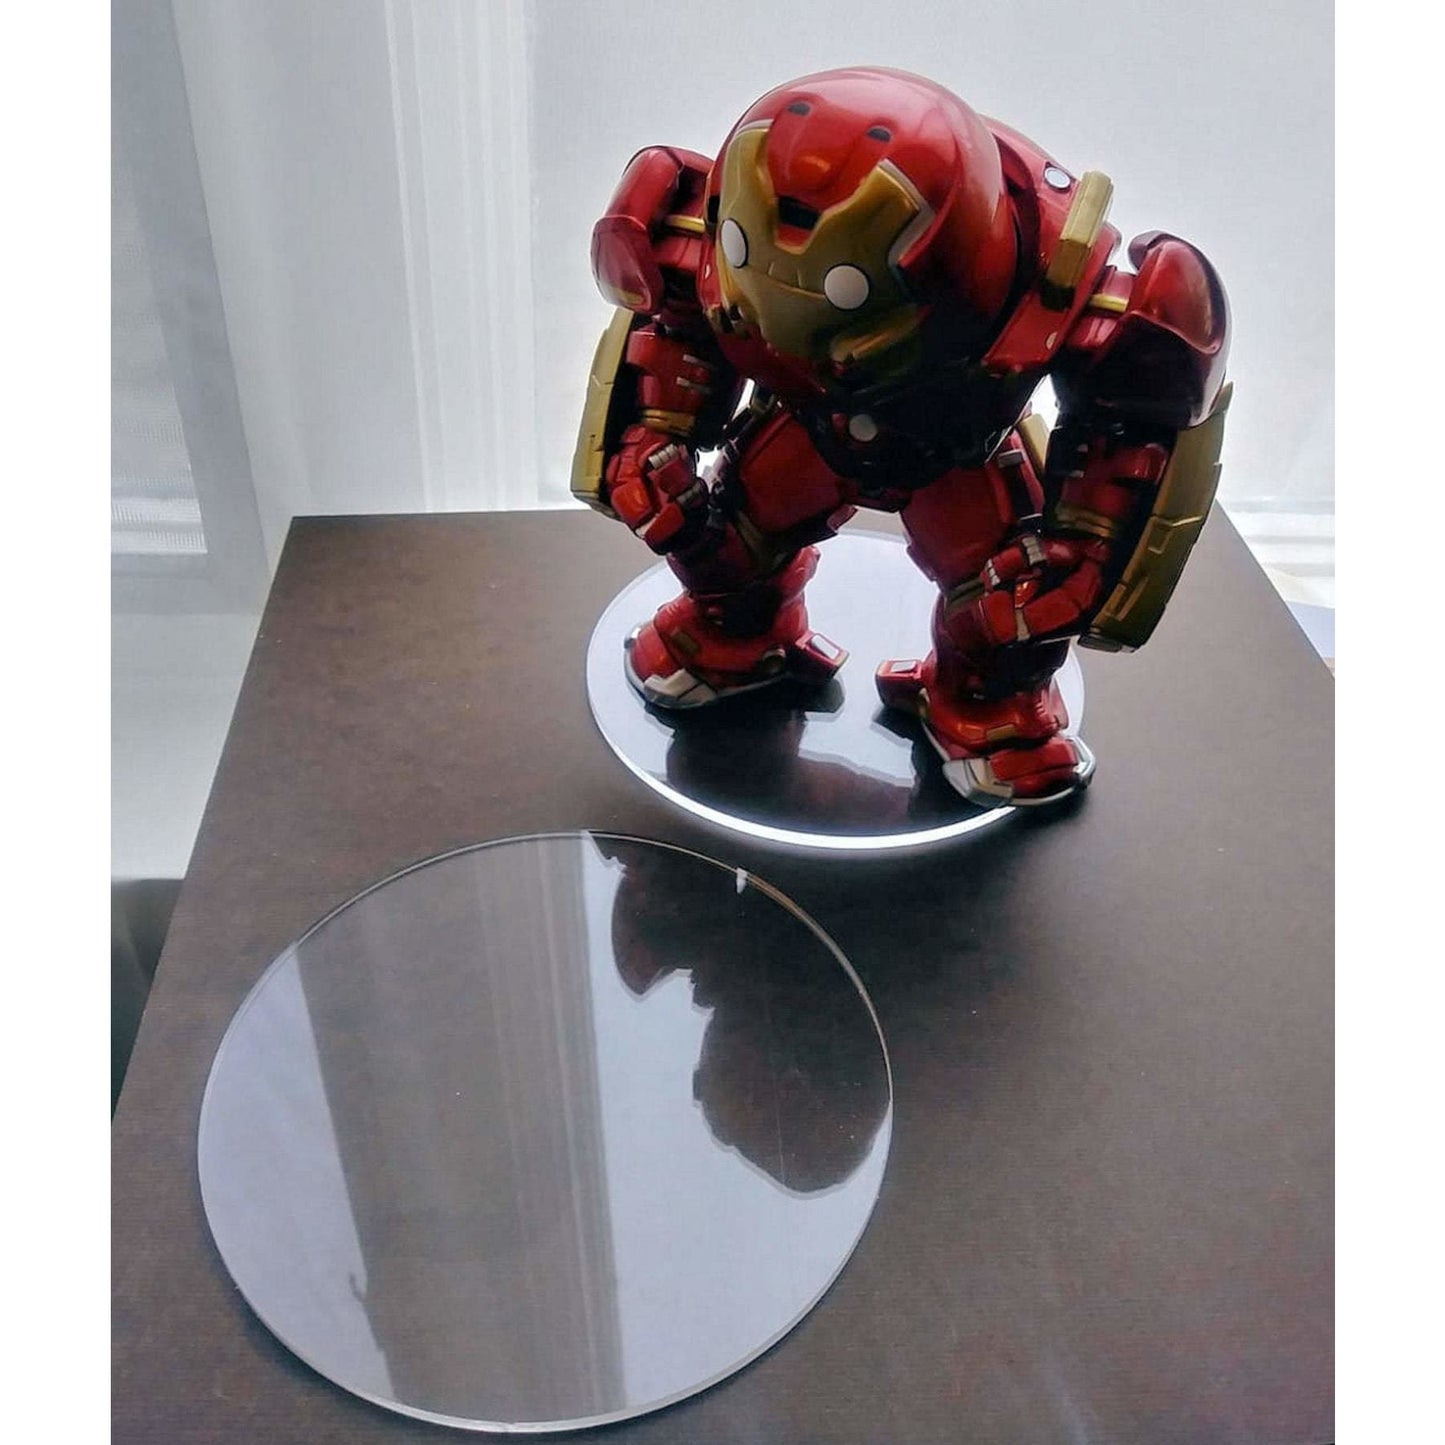 For 6" Funko Pop Vinyl: Clear Acrylic 5" Round Base Stand